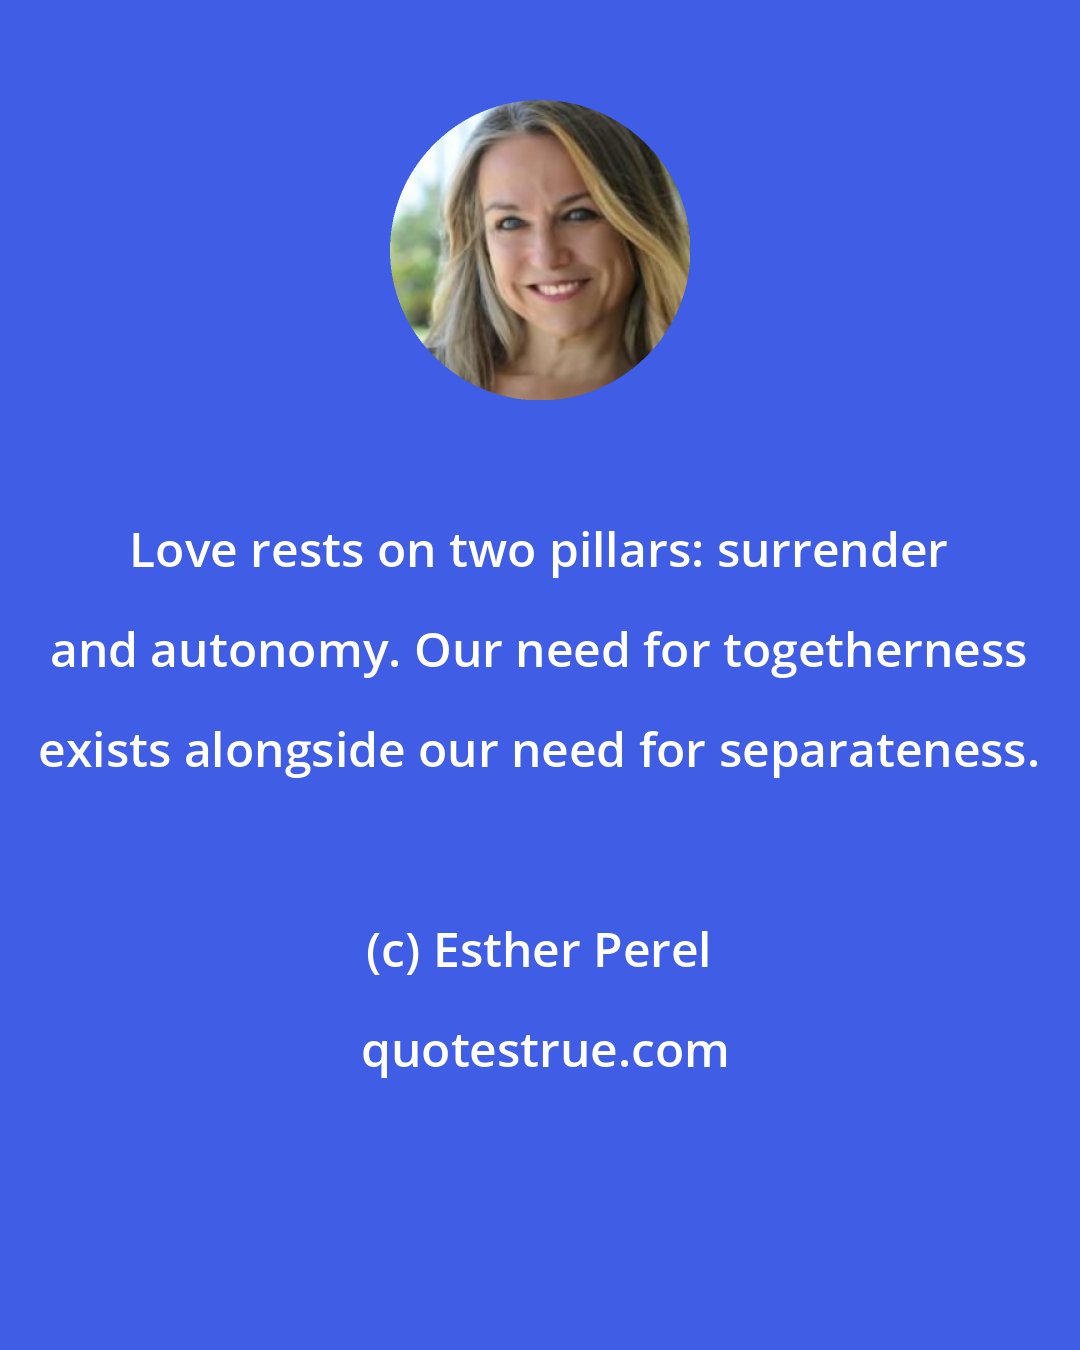 Esther Perel: Love rests on two pillars: surrender and autonomy. Our need for togetherness exists alongside our need for separateness.